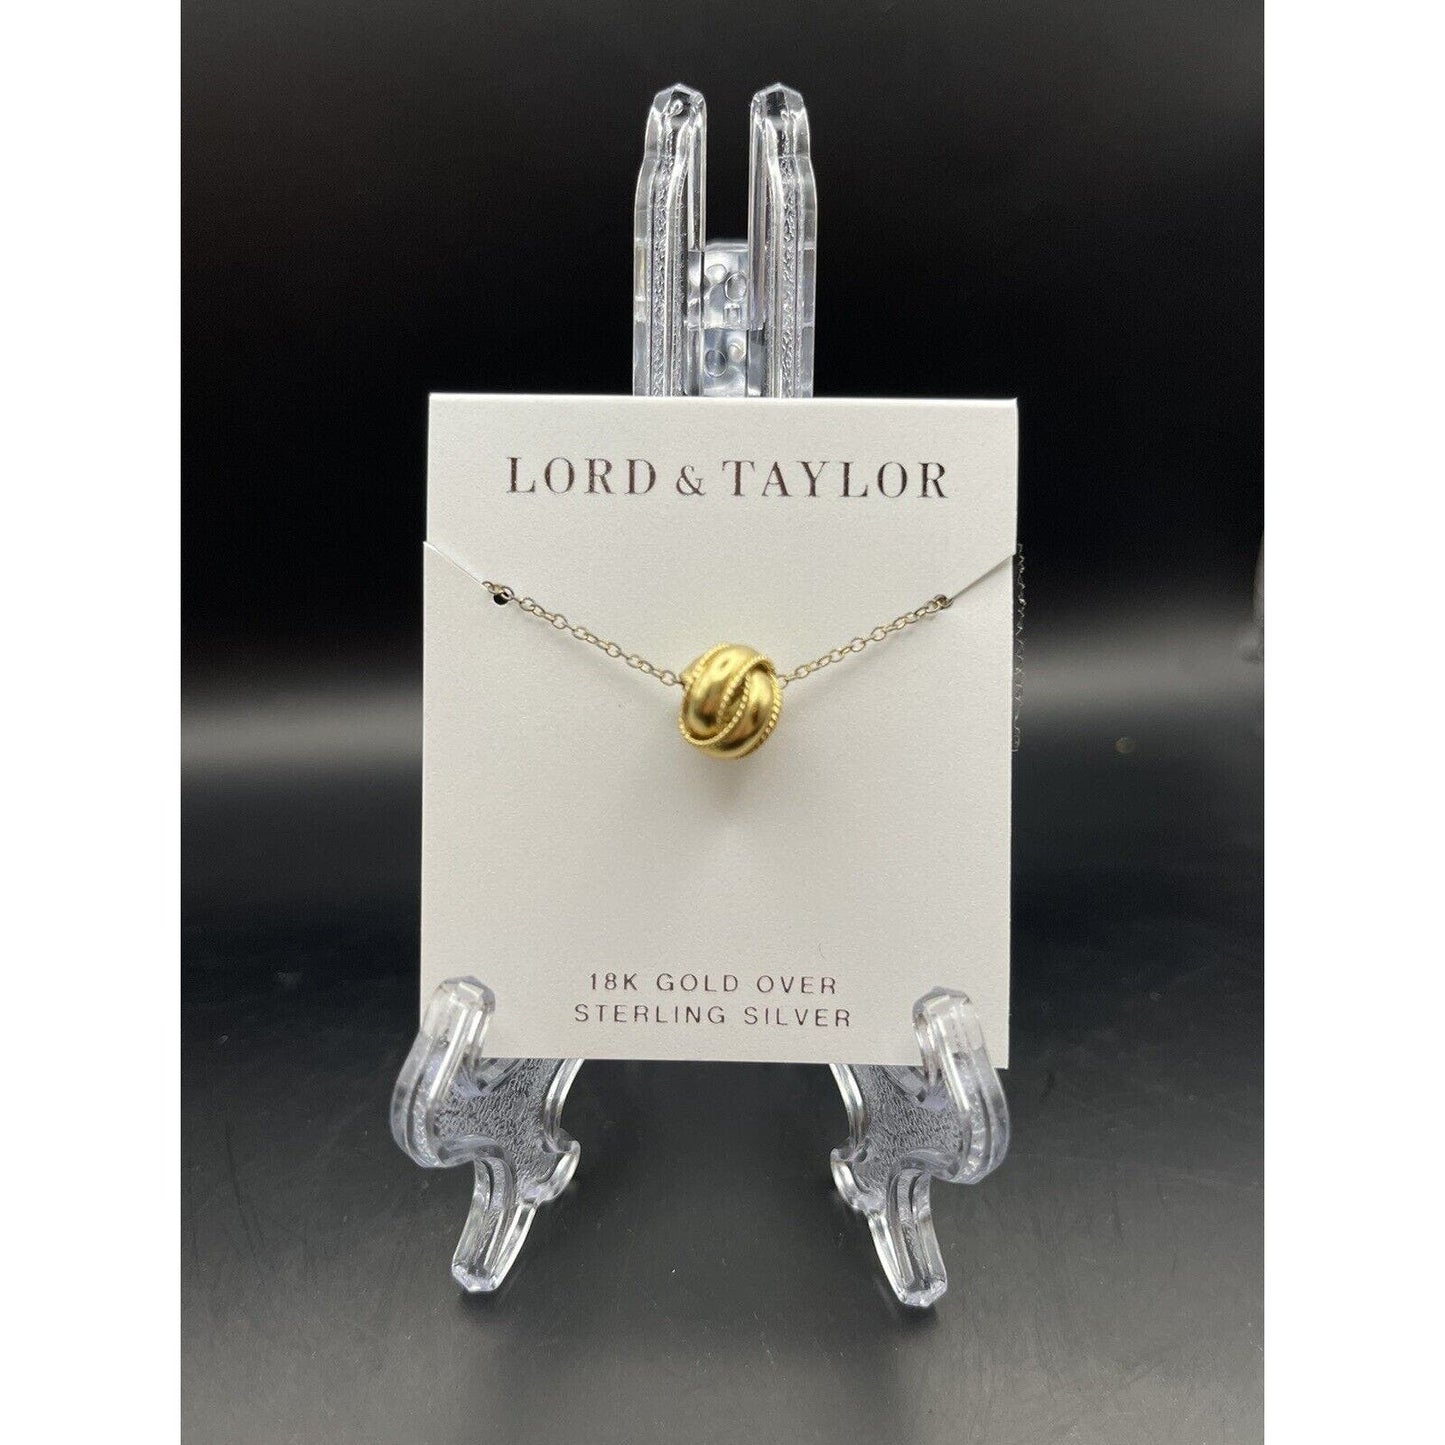 18K Gold Over Sterling Silver Necklace By Lord & Taylor Brand New With Tags $70